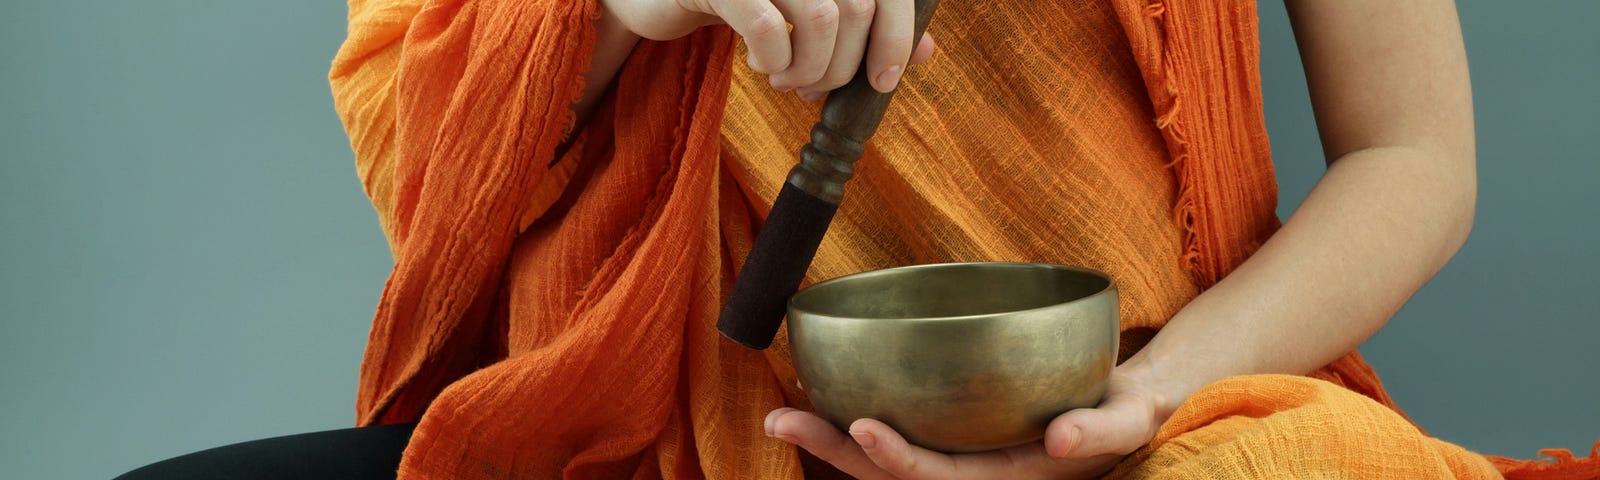 Torso only of someone sitting cross-legged, wearing black leggings and a wide orange shawl, holding a metal singing bowl in one hand and a wooden mallet in the other, apparently sounding them together.